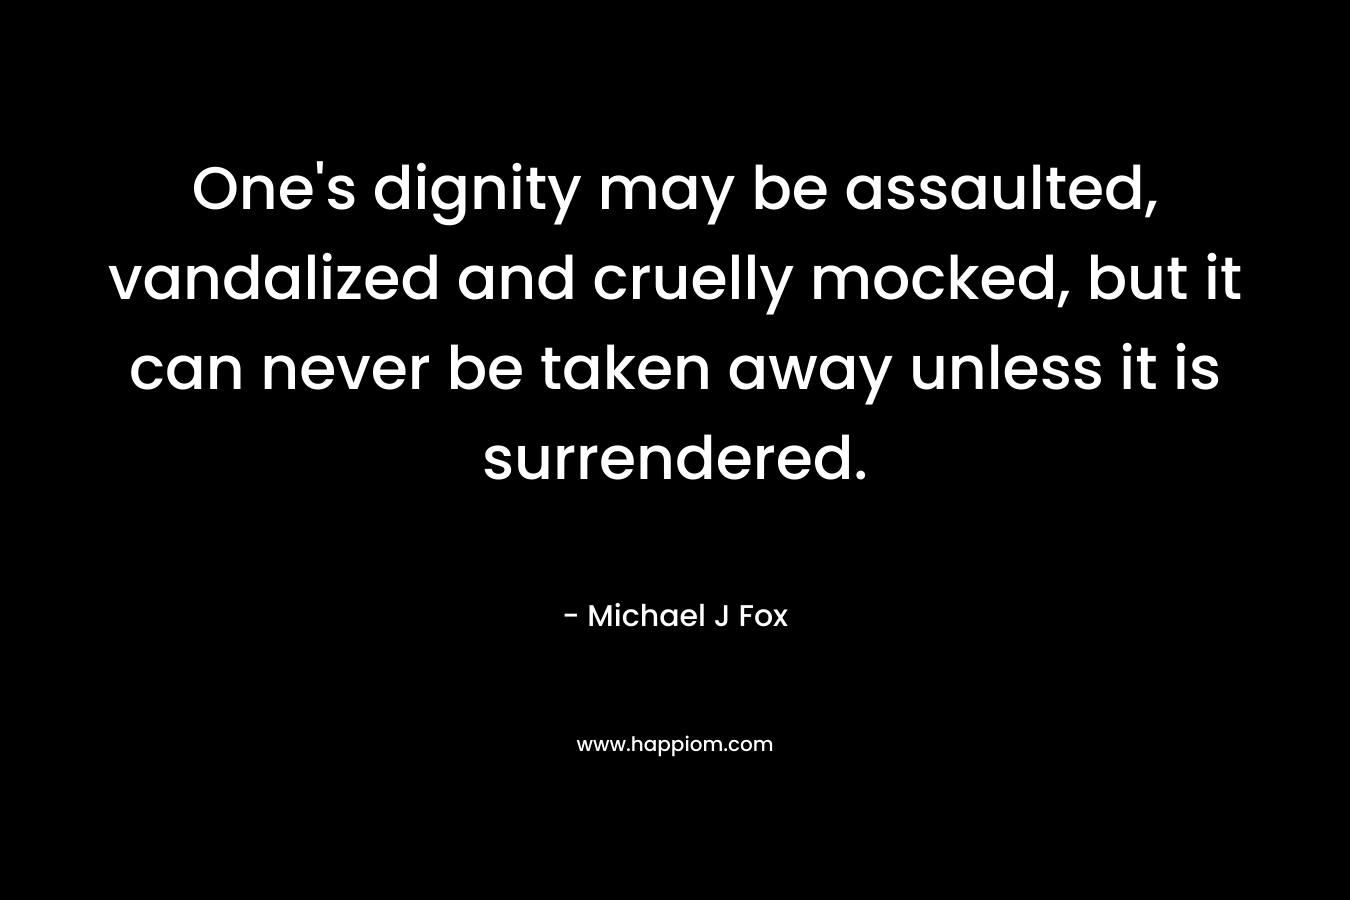 One’s dignity may be assaulted, vandalized and cruelly mocked, but it can never be taken away unless it is surrendered. – Michael J Fox